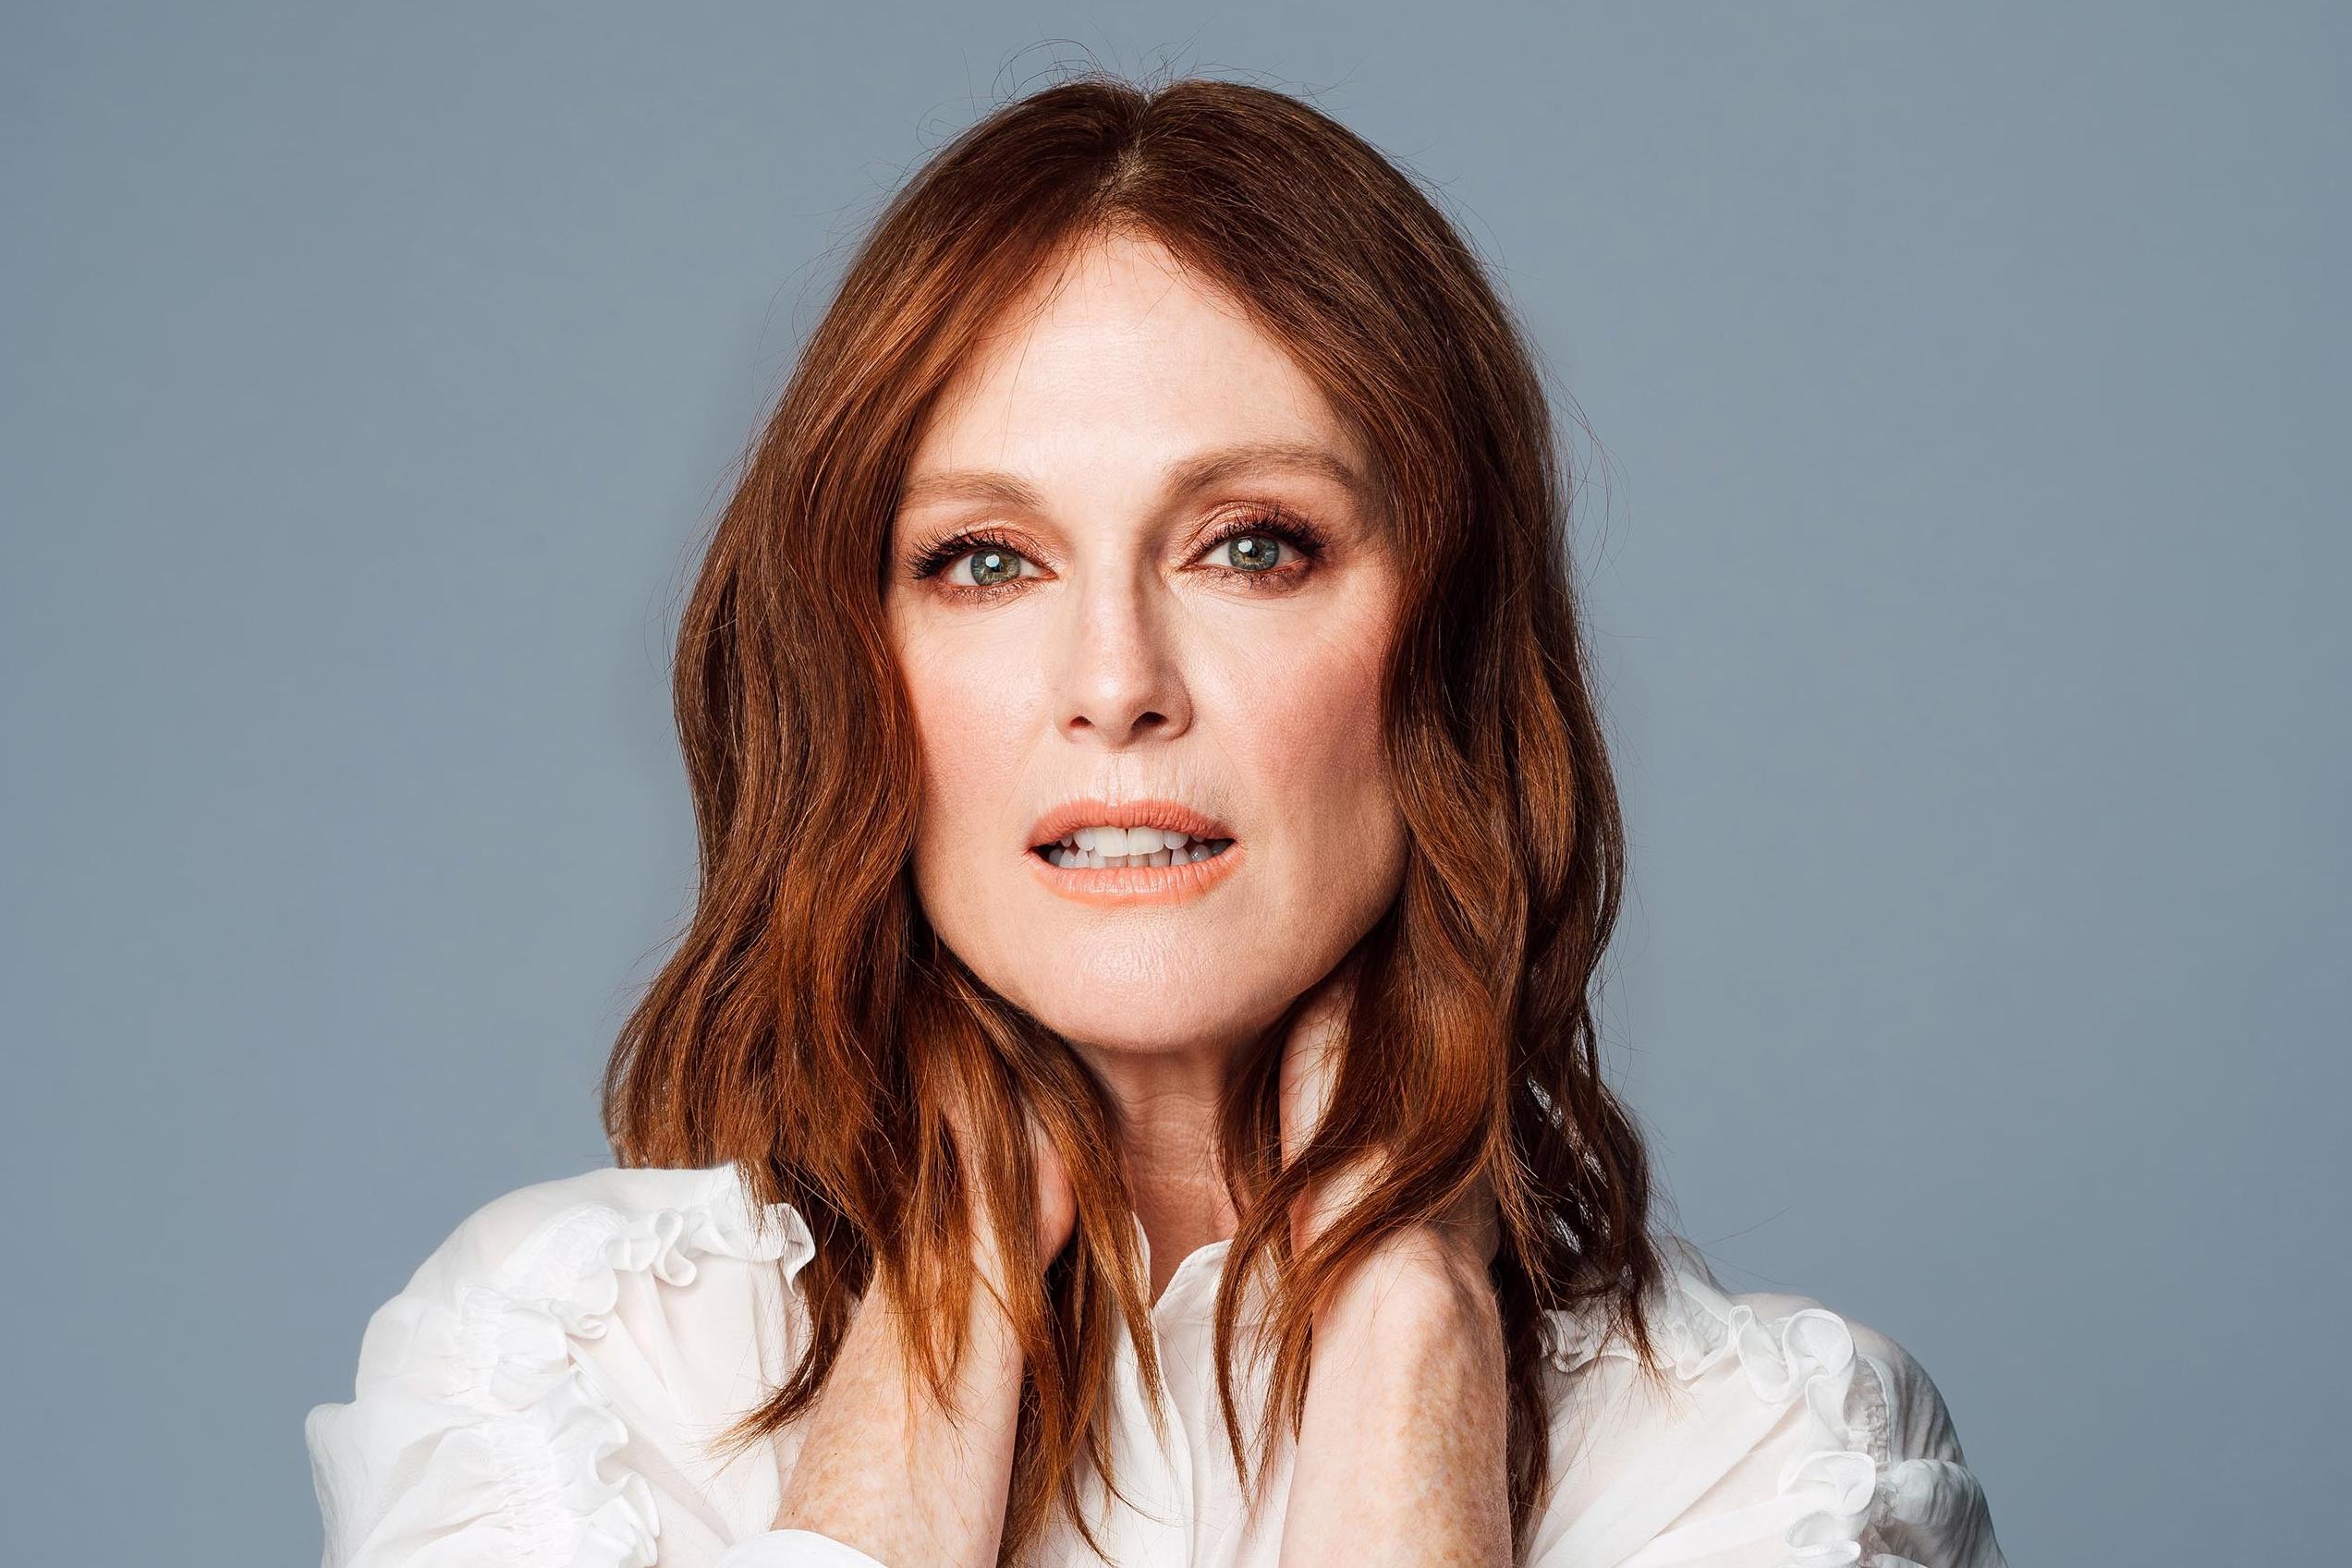 Julianne Moore’s Red Hair Use To Make Her Feel “Like An Outsider”